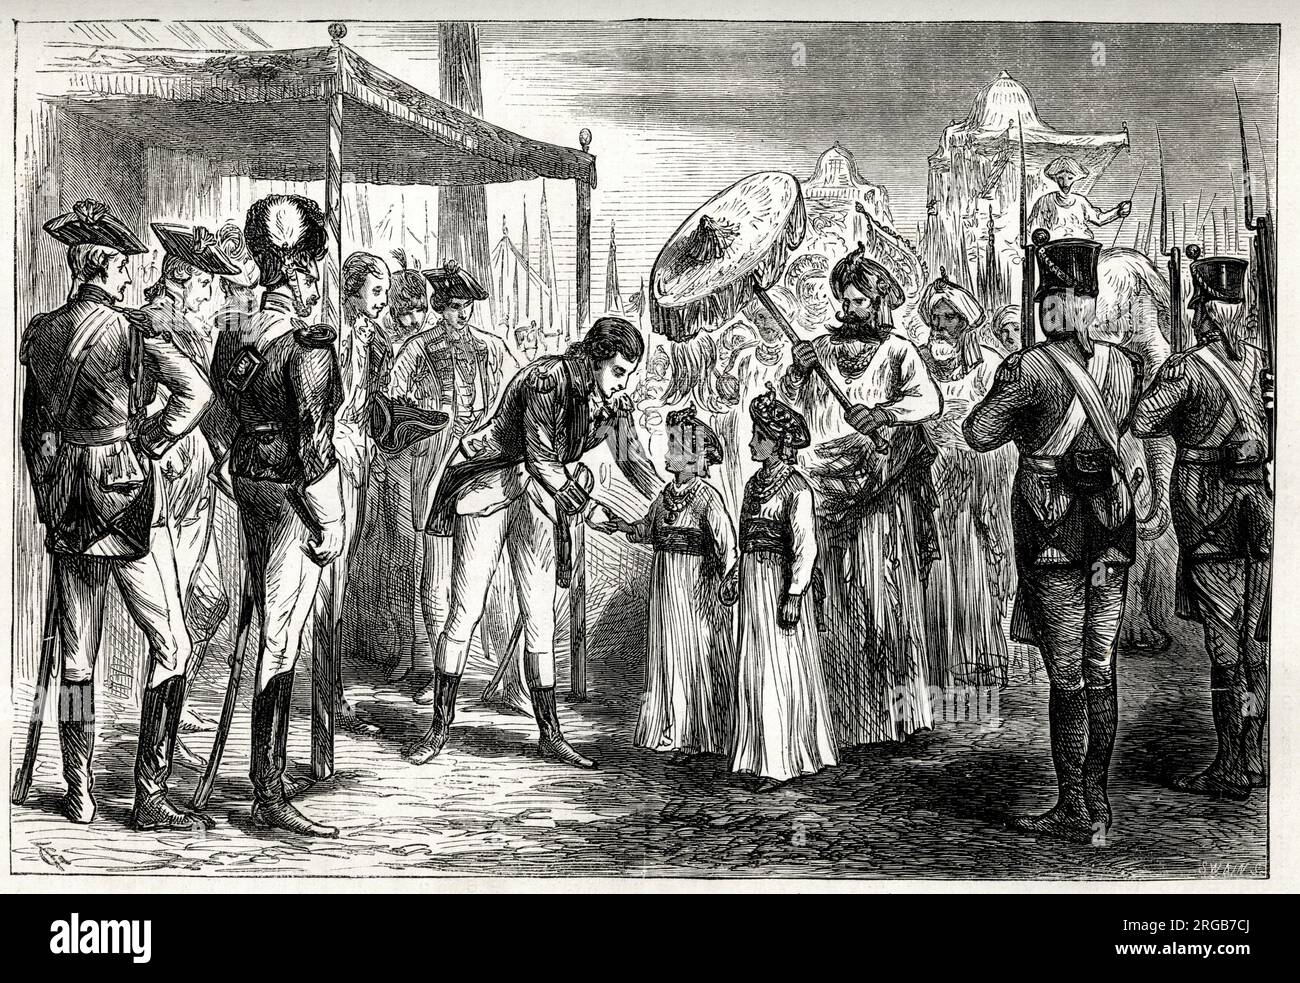 Reception of the hostages from Tipu Sahib, Sultan of Mysore, by Lord Cornwallis, March 1792. Tipu's two sons, aged about ten and eight, were temporarily taken hostage by the British as part of a peace treaty. Stock Photo